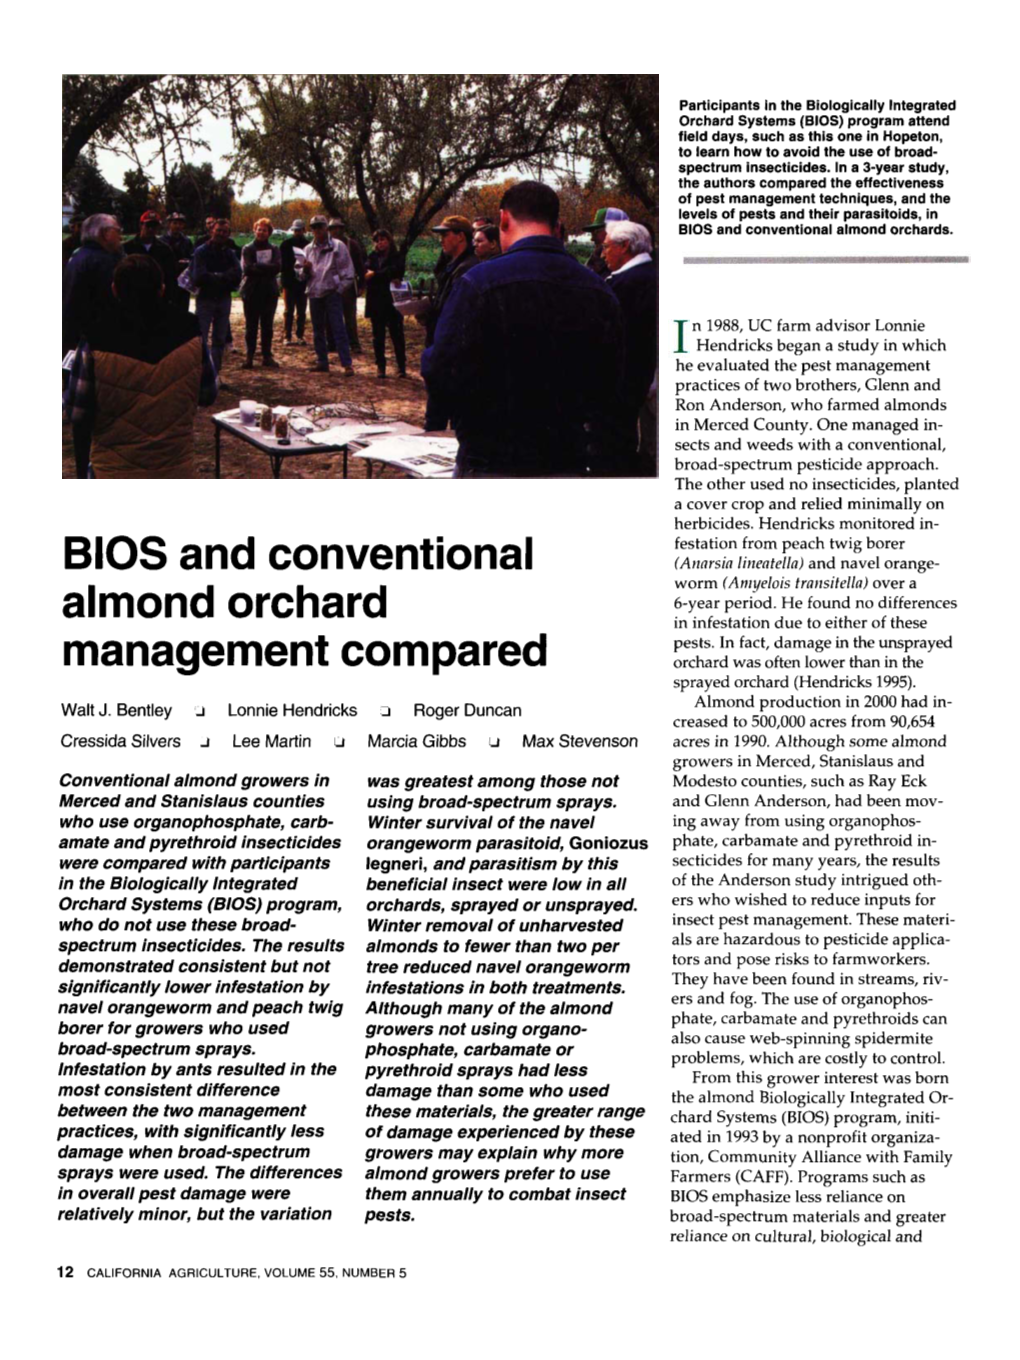 BIOS and Conventional Almond Orchard Management Compared